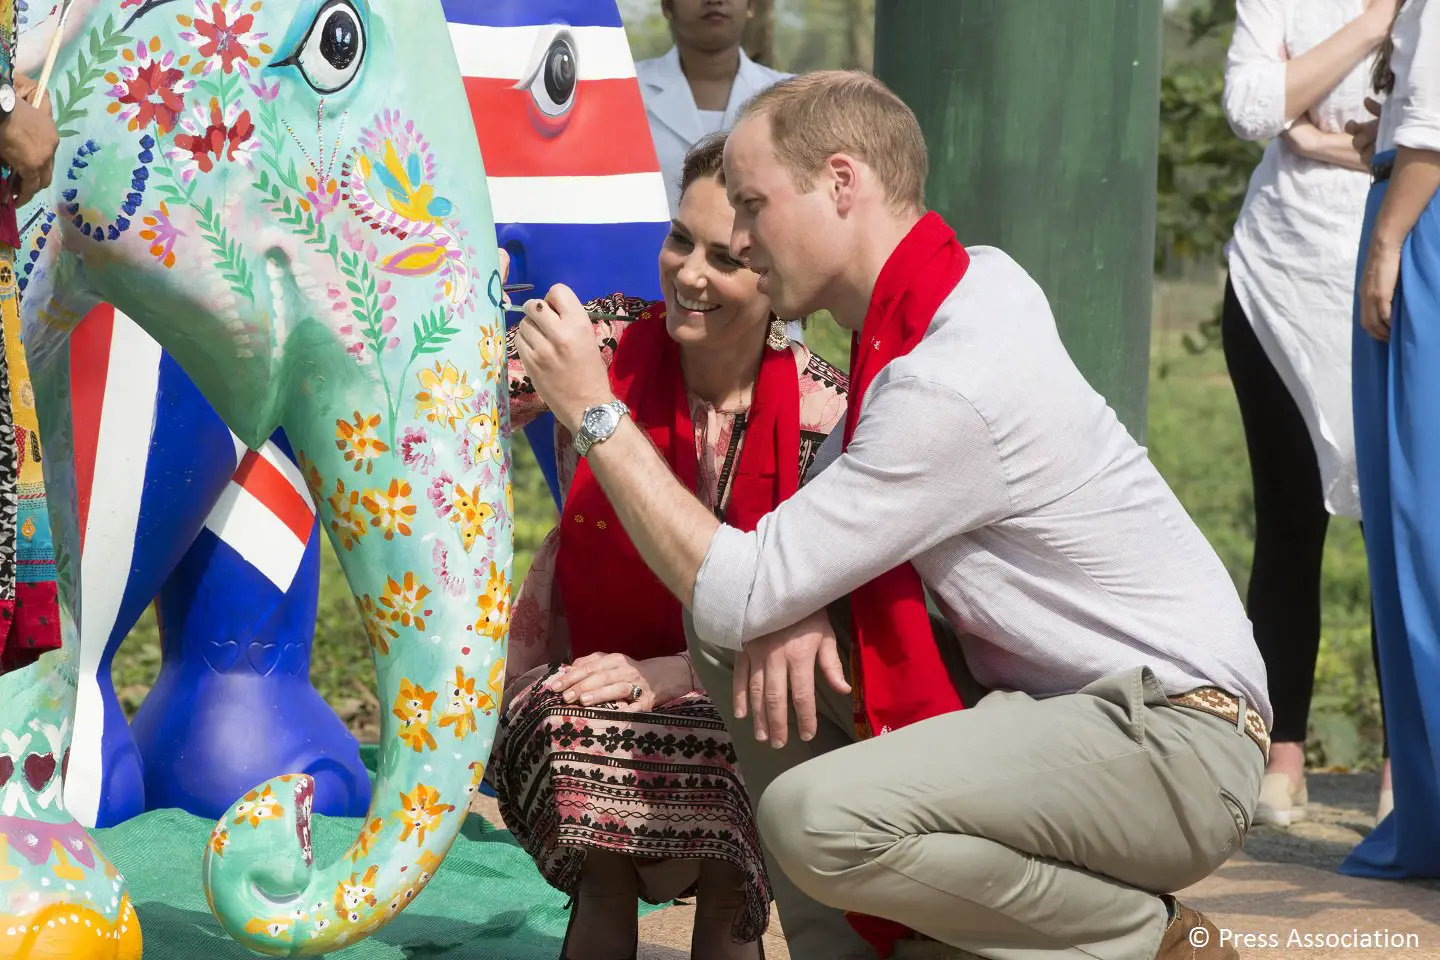 The Duke and Duchess of Cambridge put the finishing touches on an elephant sculpture to officially mark the ‘call for artists’ for India’s elephant parade